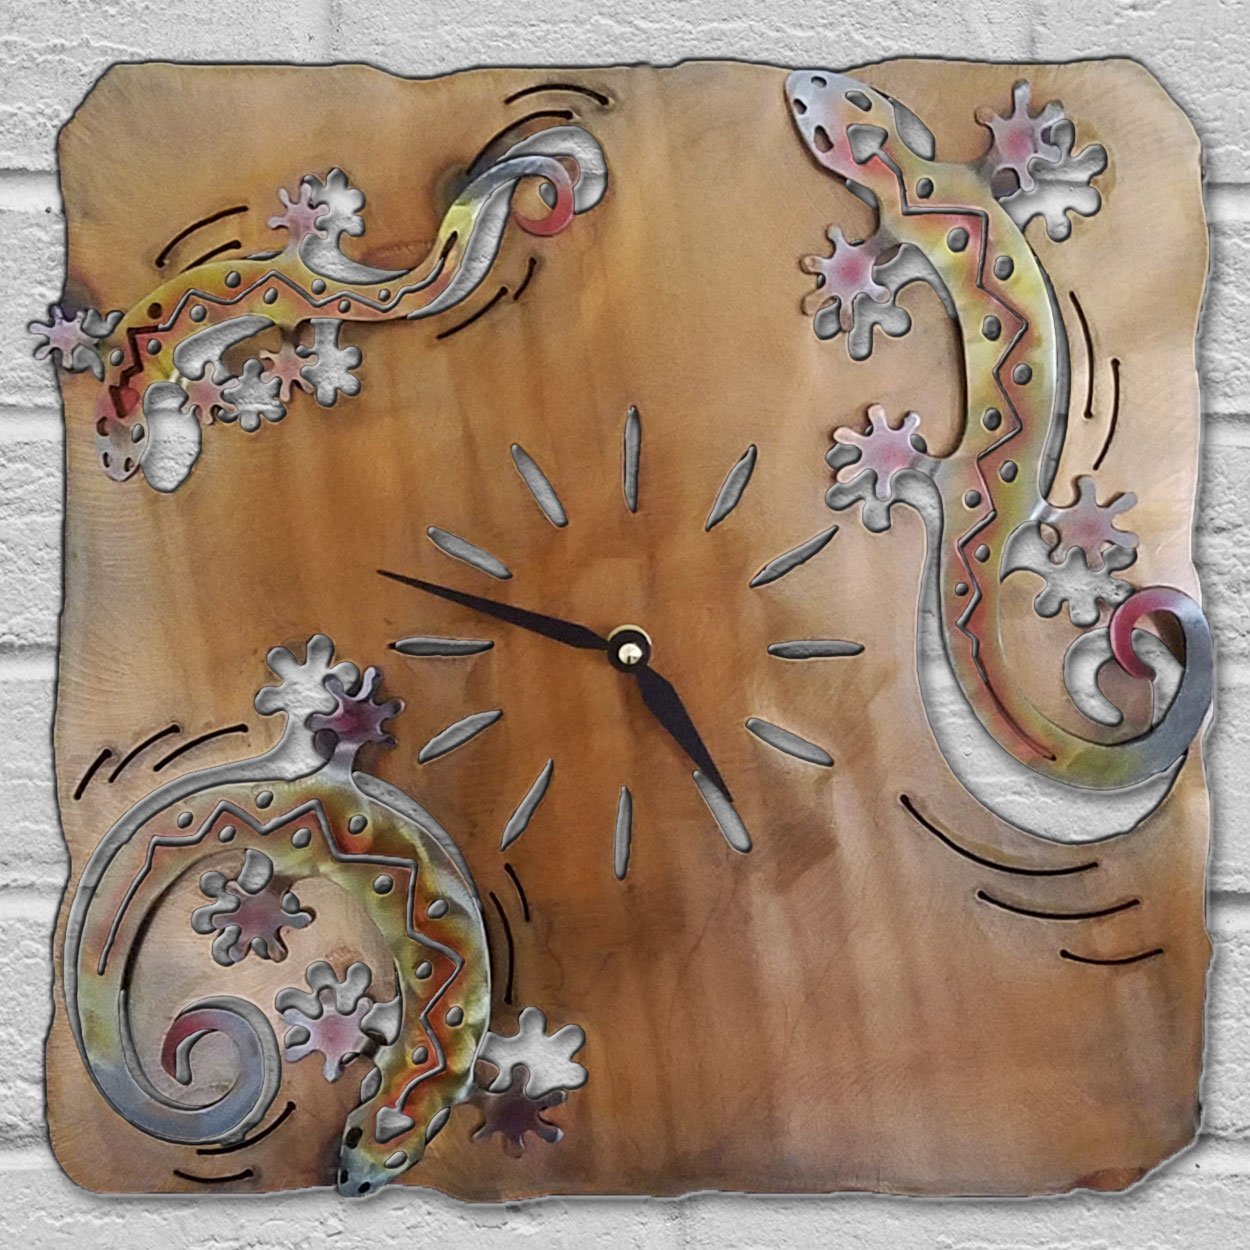 165752 - 13in Southwest Decor Lizards Metal Wall Clock in Sunset Finish